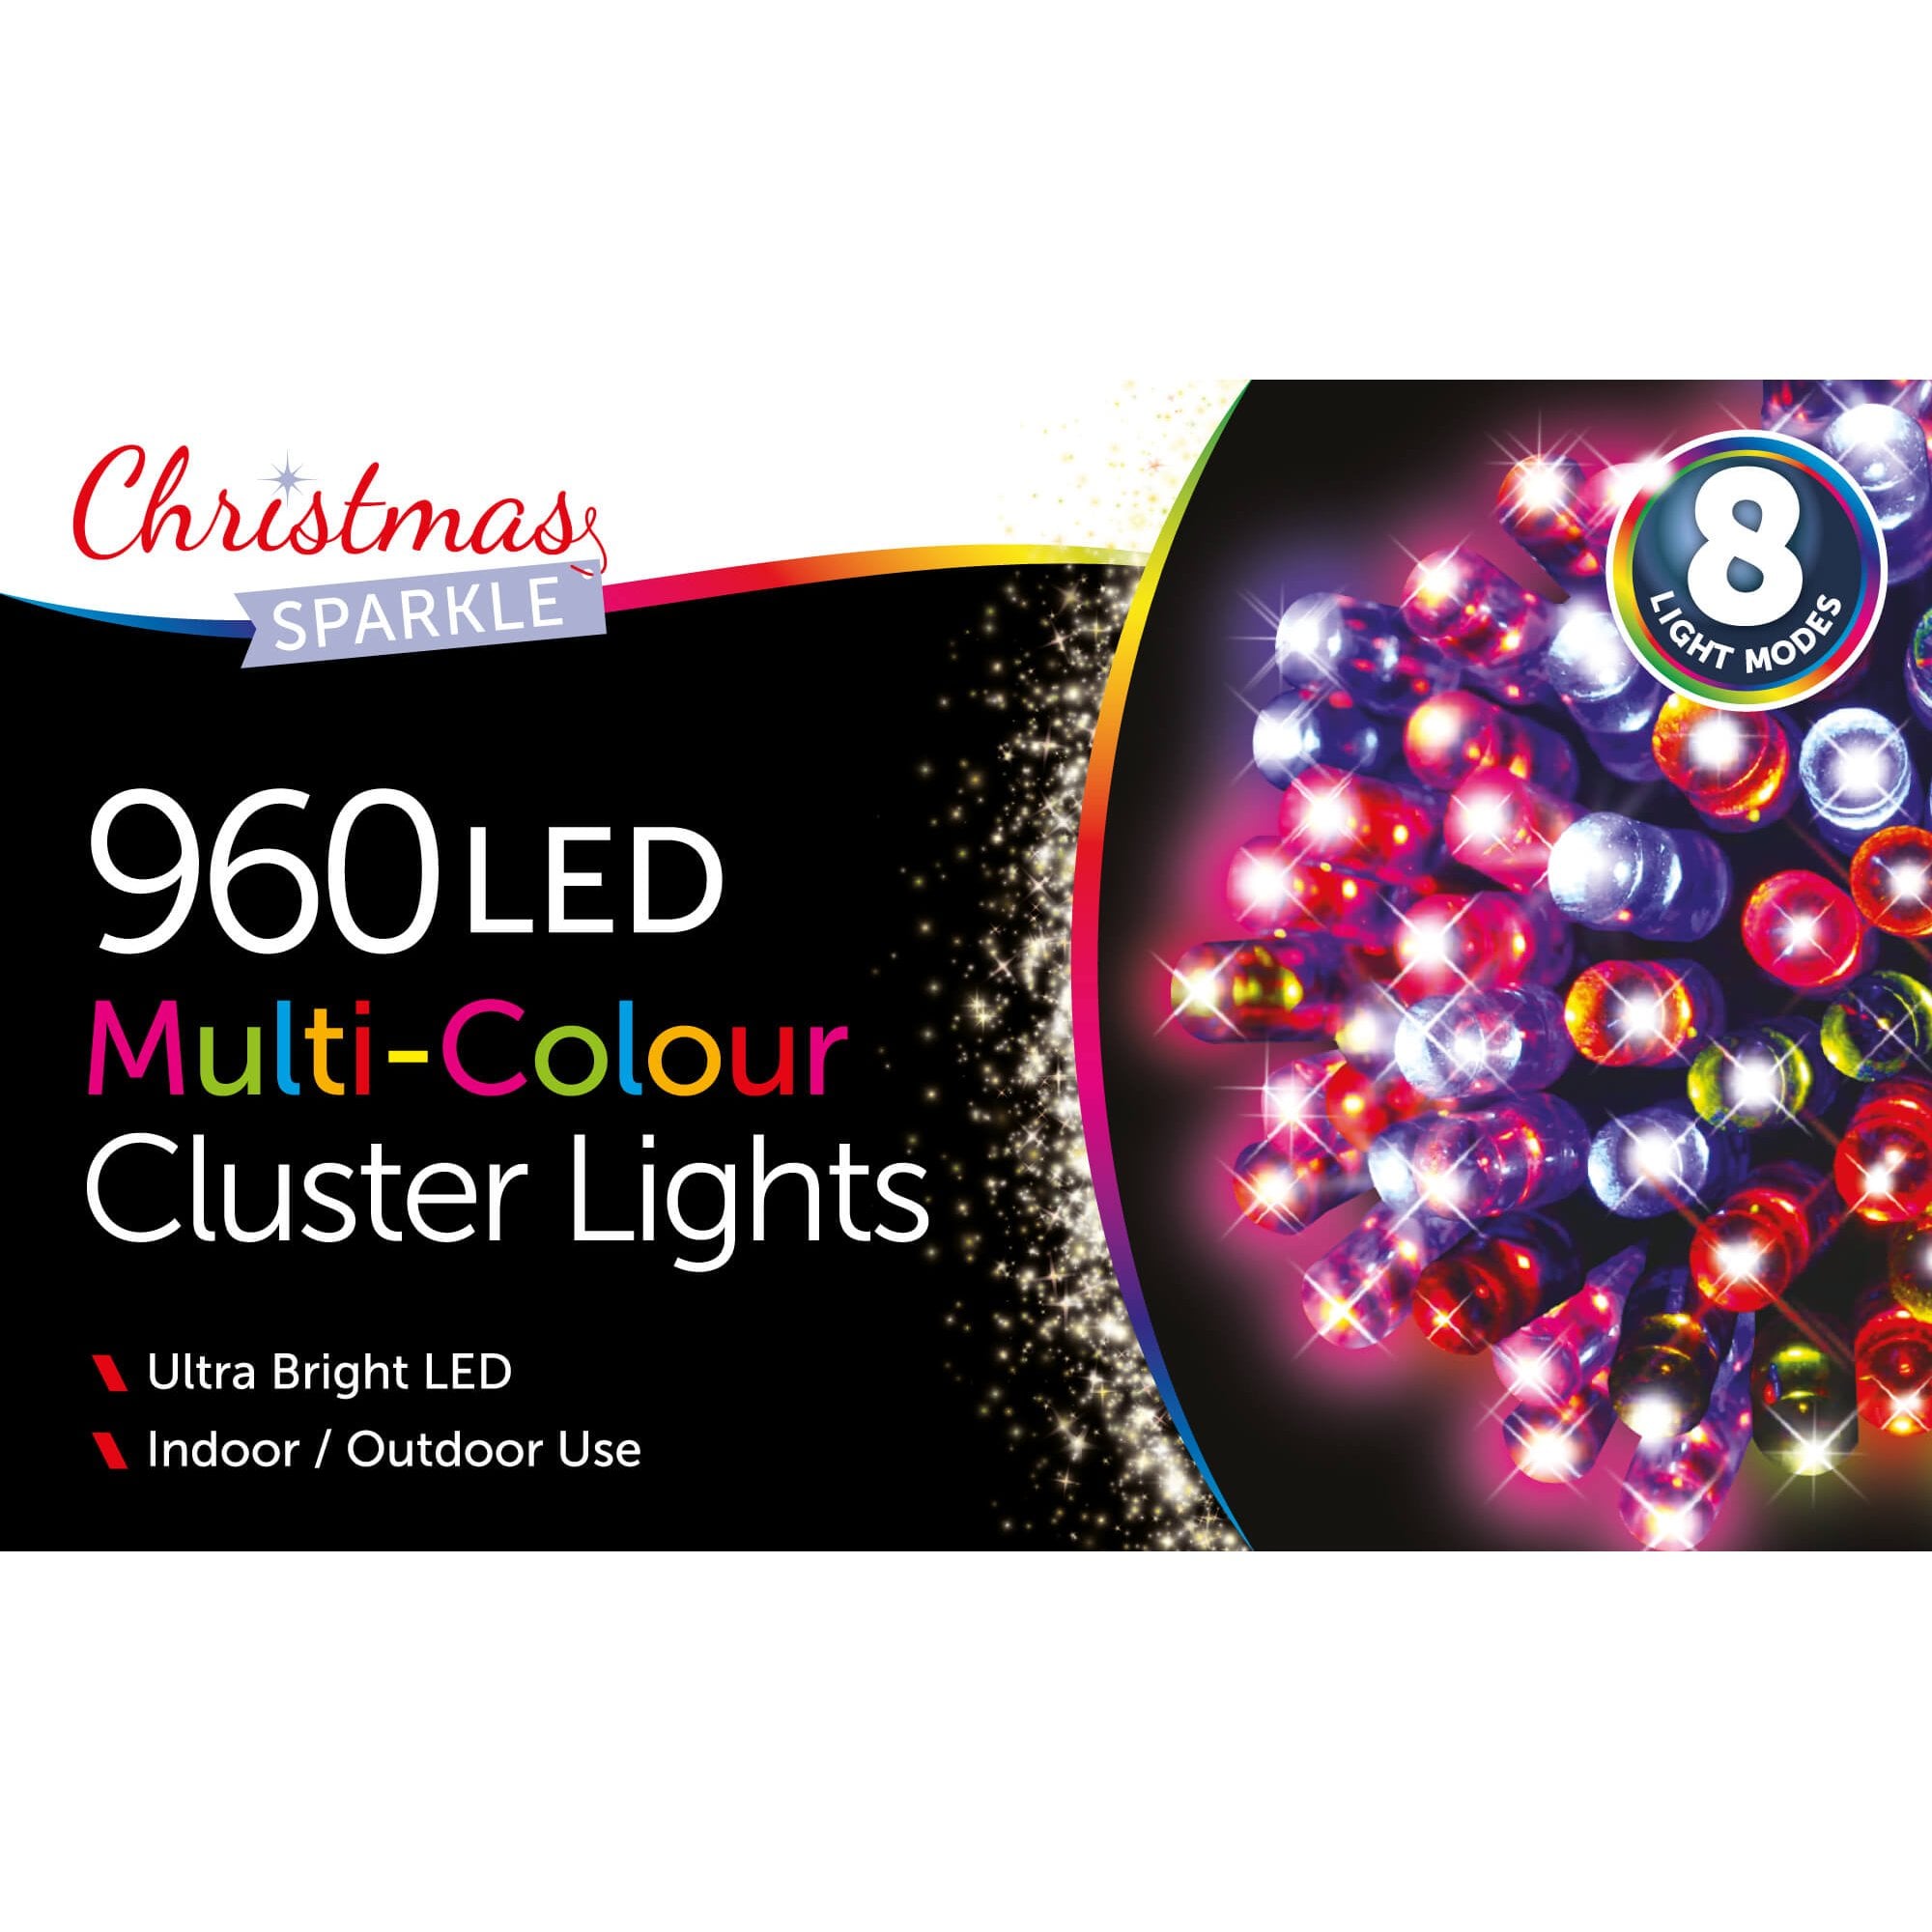 Christmas Sparkle Indoor and Outdoor Cluster Lights x 960 with Multi Colour LEDs - Mains Operated  | TJ Hughes